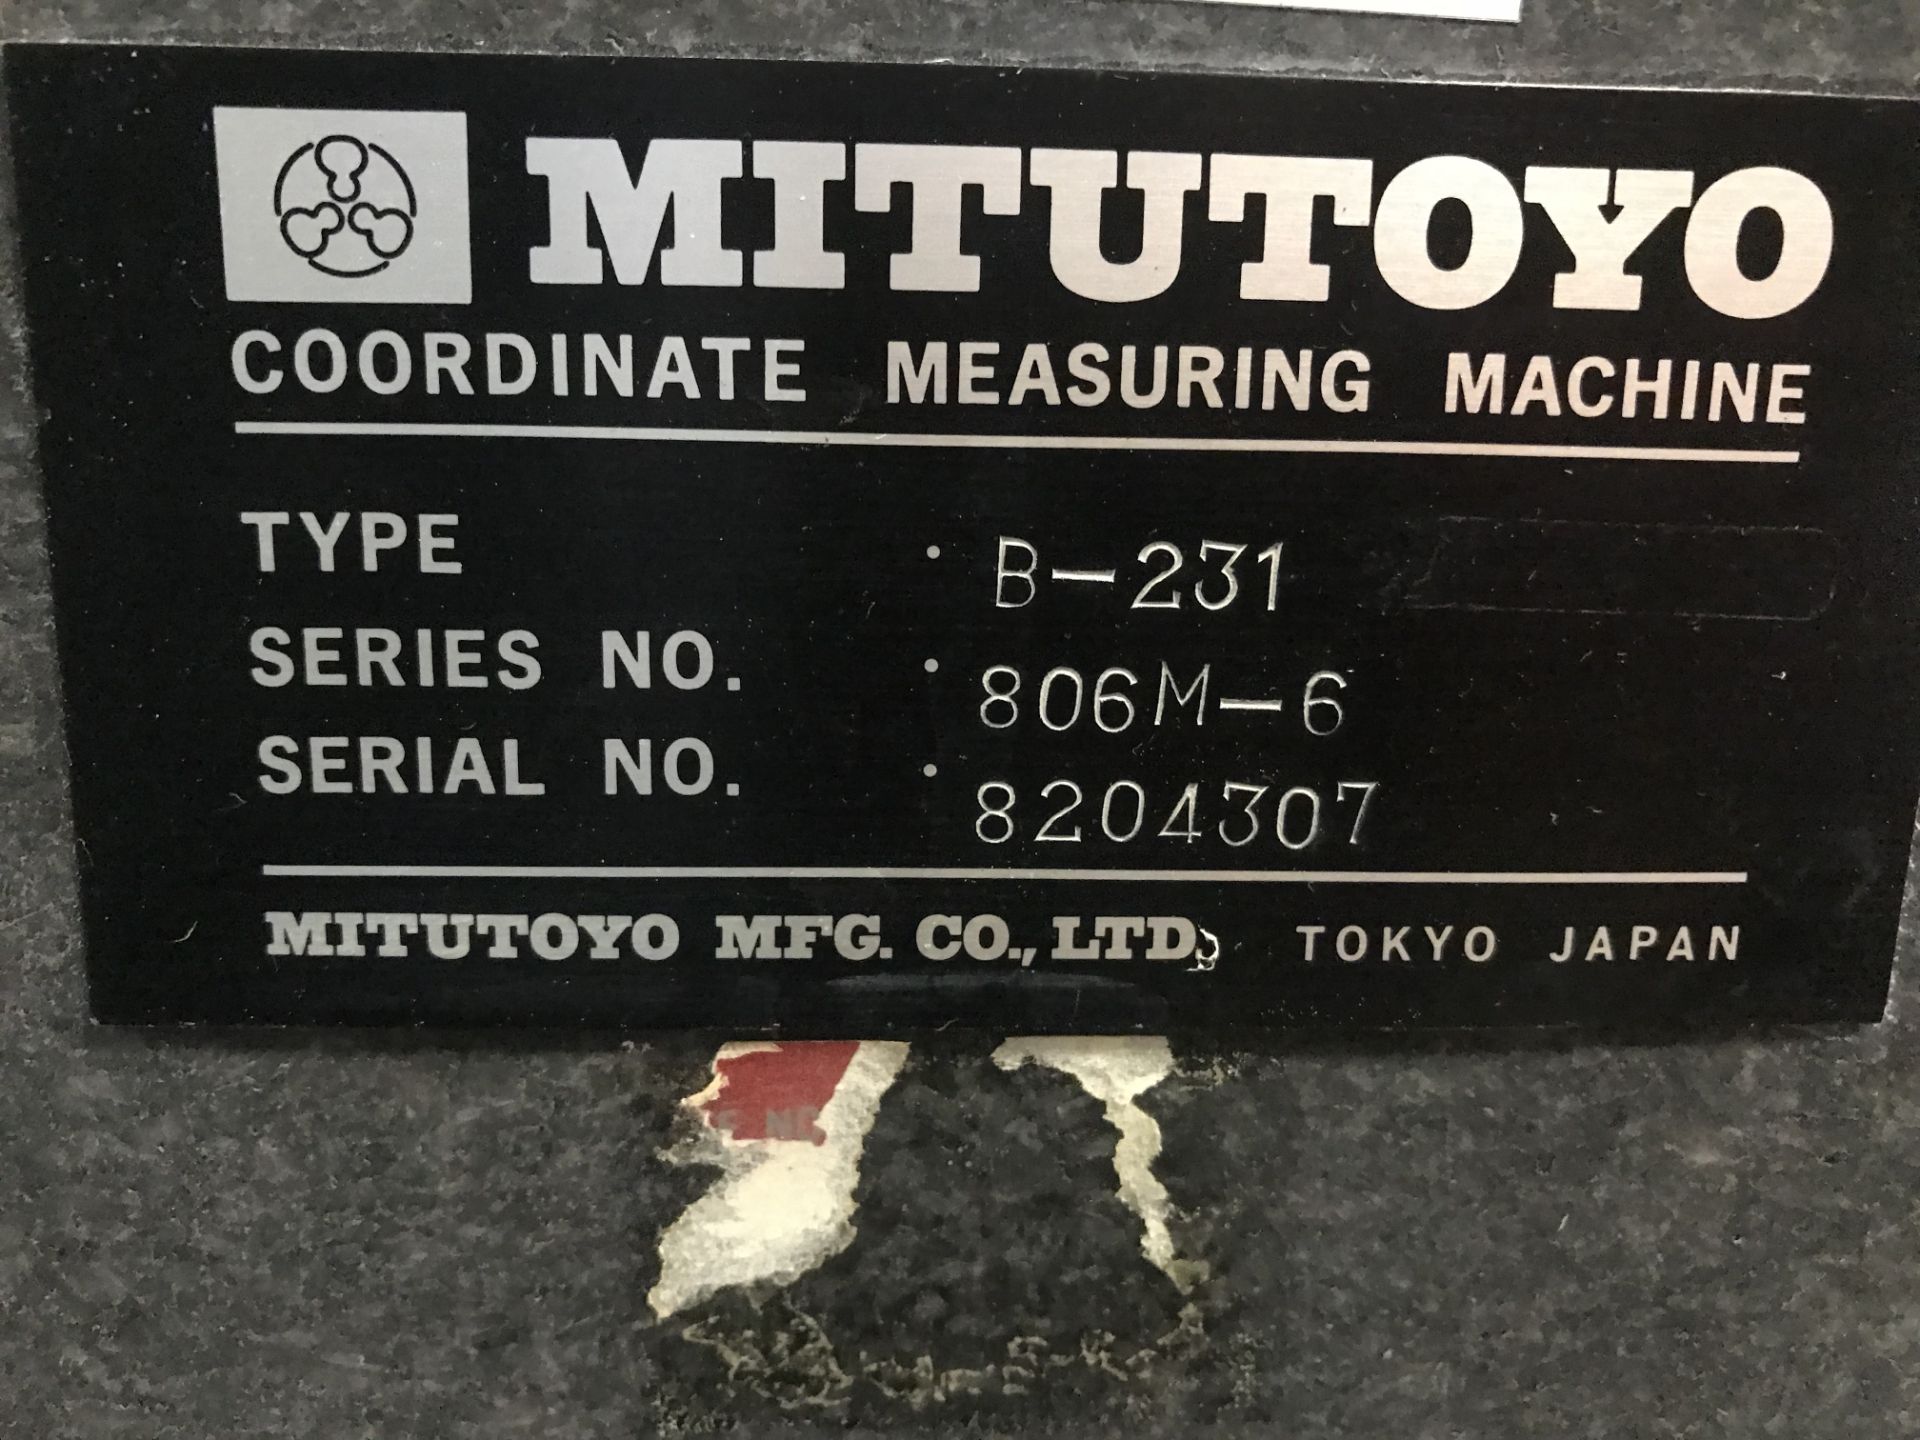 MITUTOYO COORDINATE MEASURING MACHINE TYPE B-231, SERIES NUMBER 806M-6 W/ RENISHAW ATTACHMENTS - Image 5 of 9